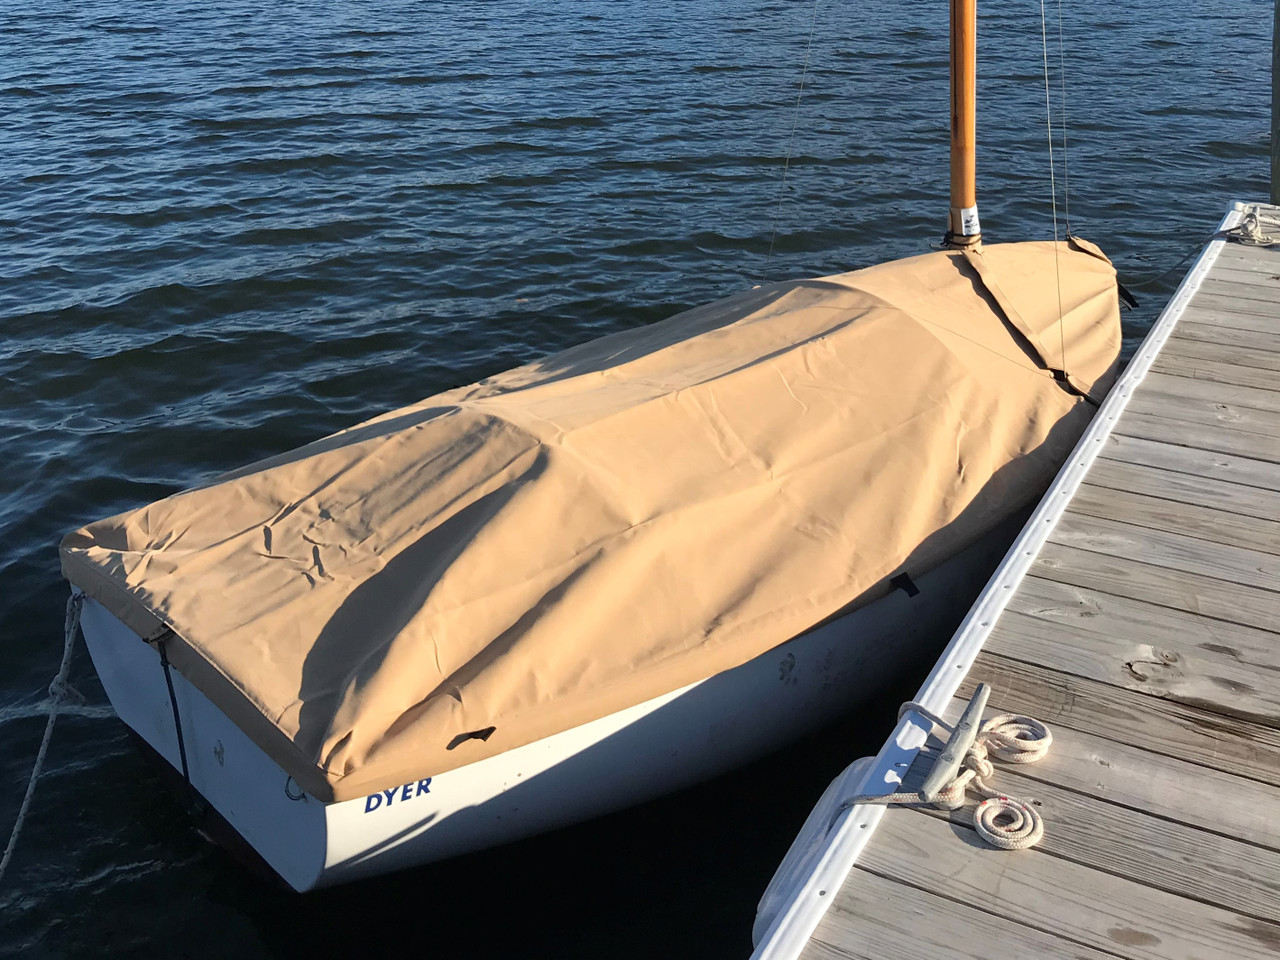 Keep your Dyer Dink dinghy free of leaves and dirt with a Mast Up Flat Cover by SLO Sail and Canvas.